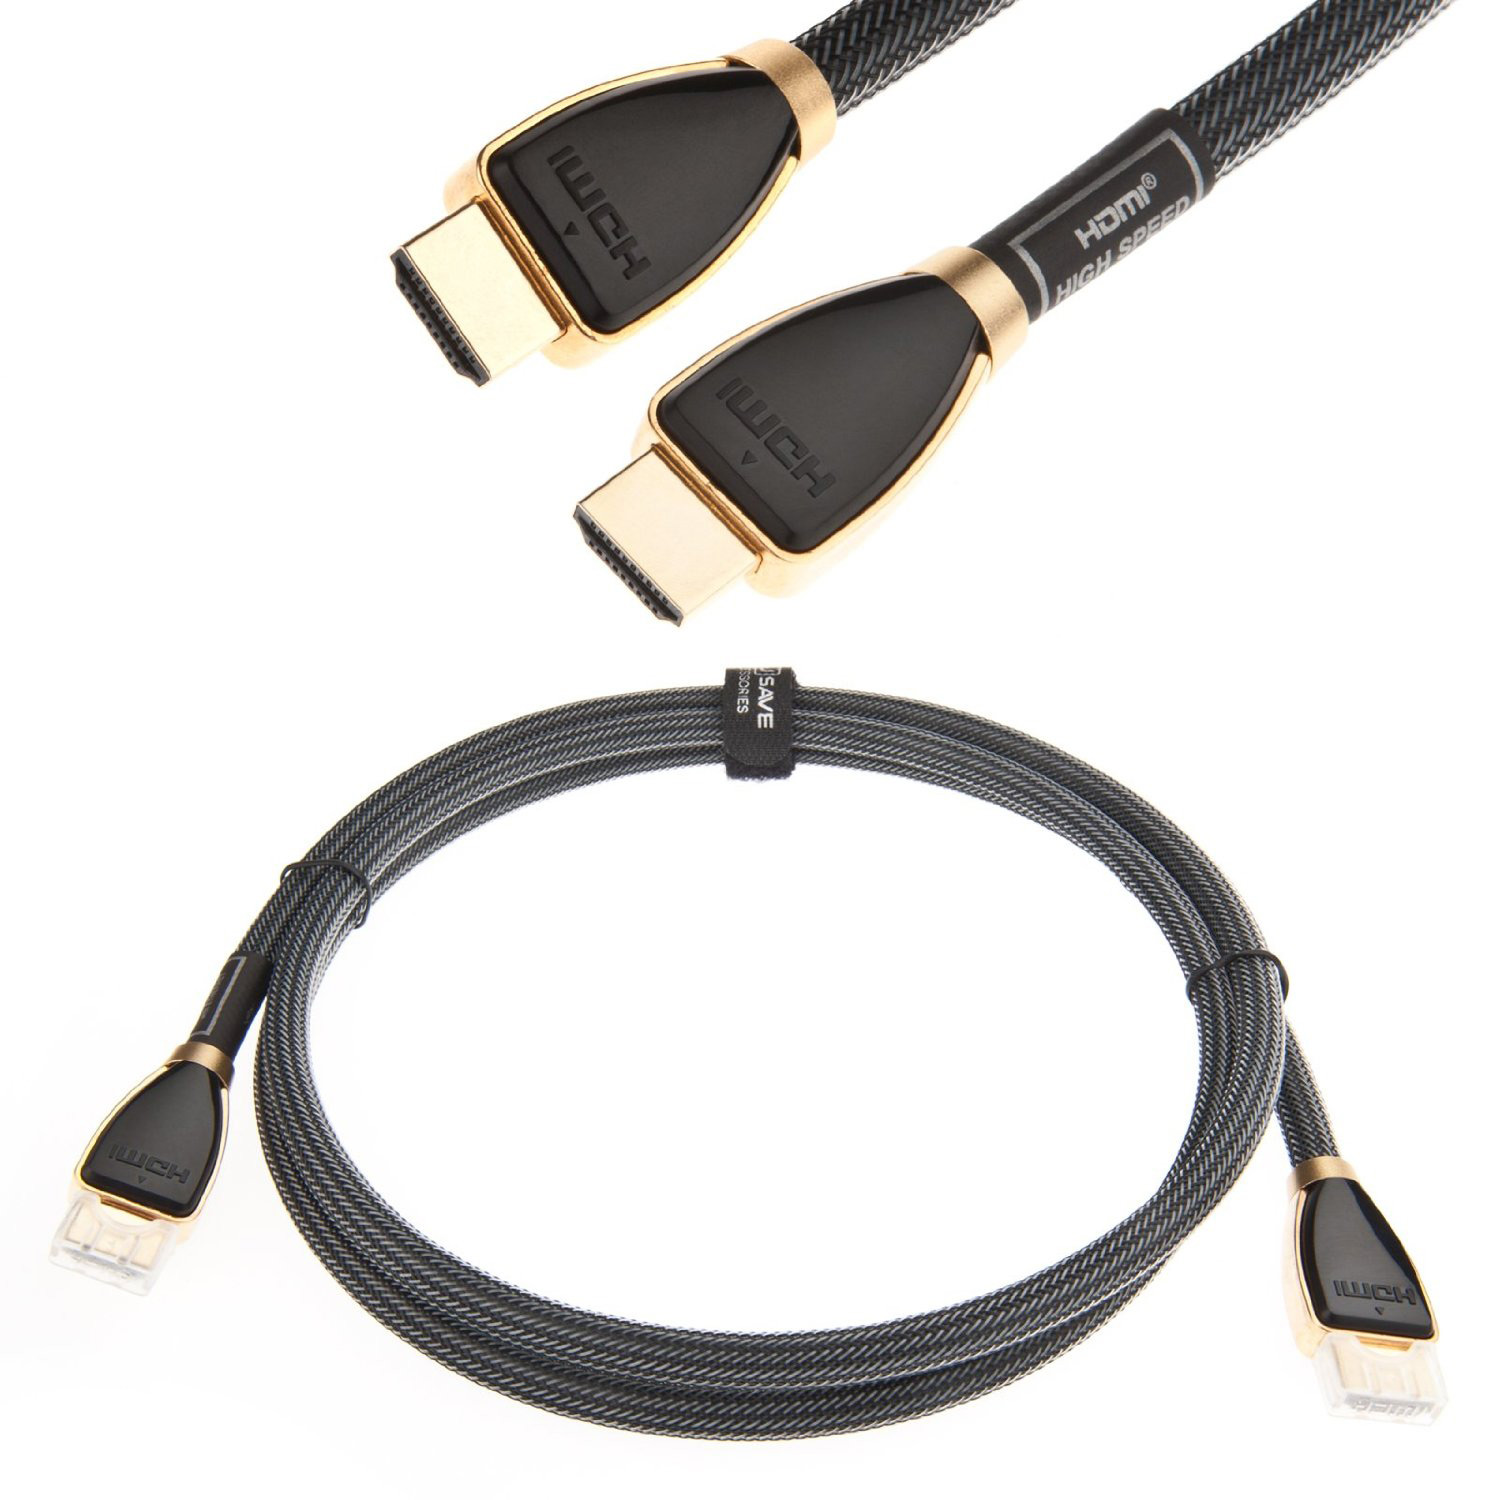 YouSave Accessories Accessories HDMI Cable 2m Gold Connectors